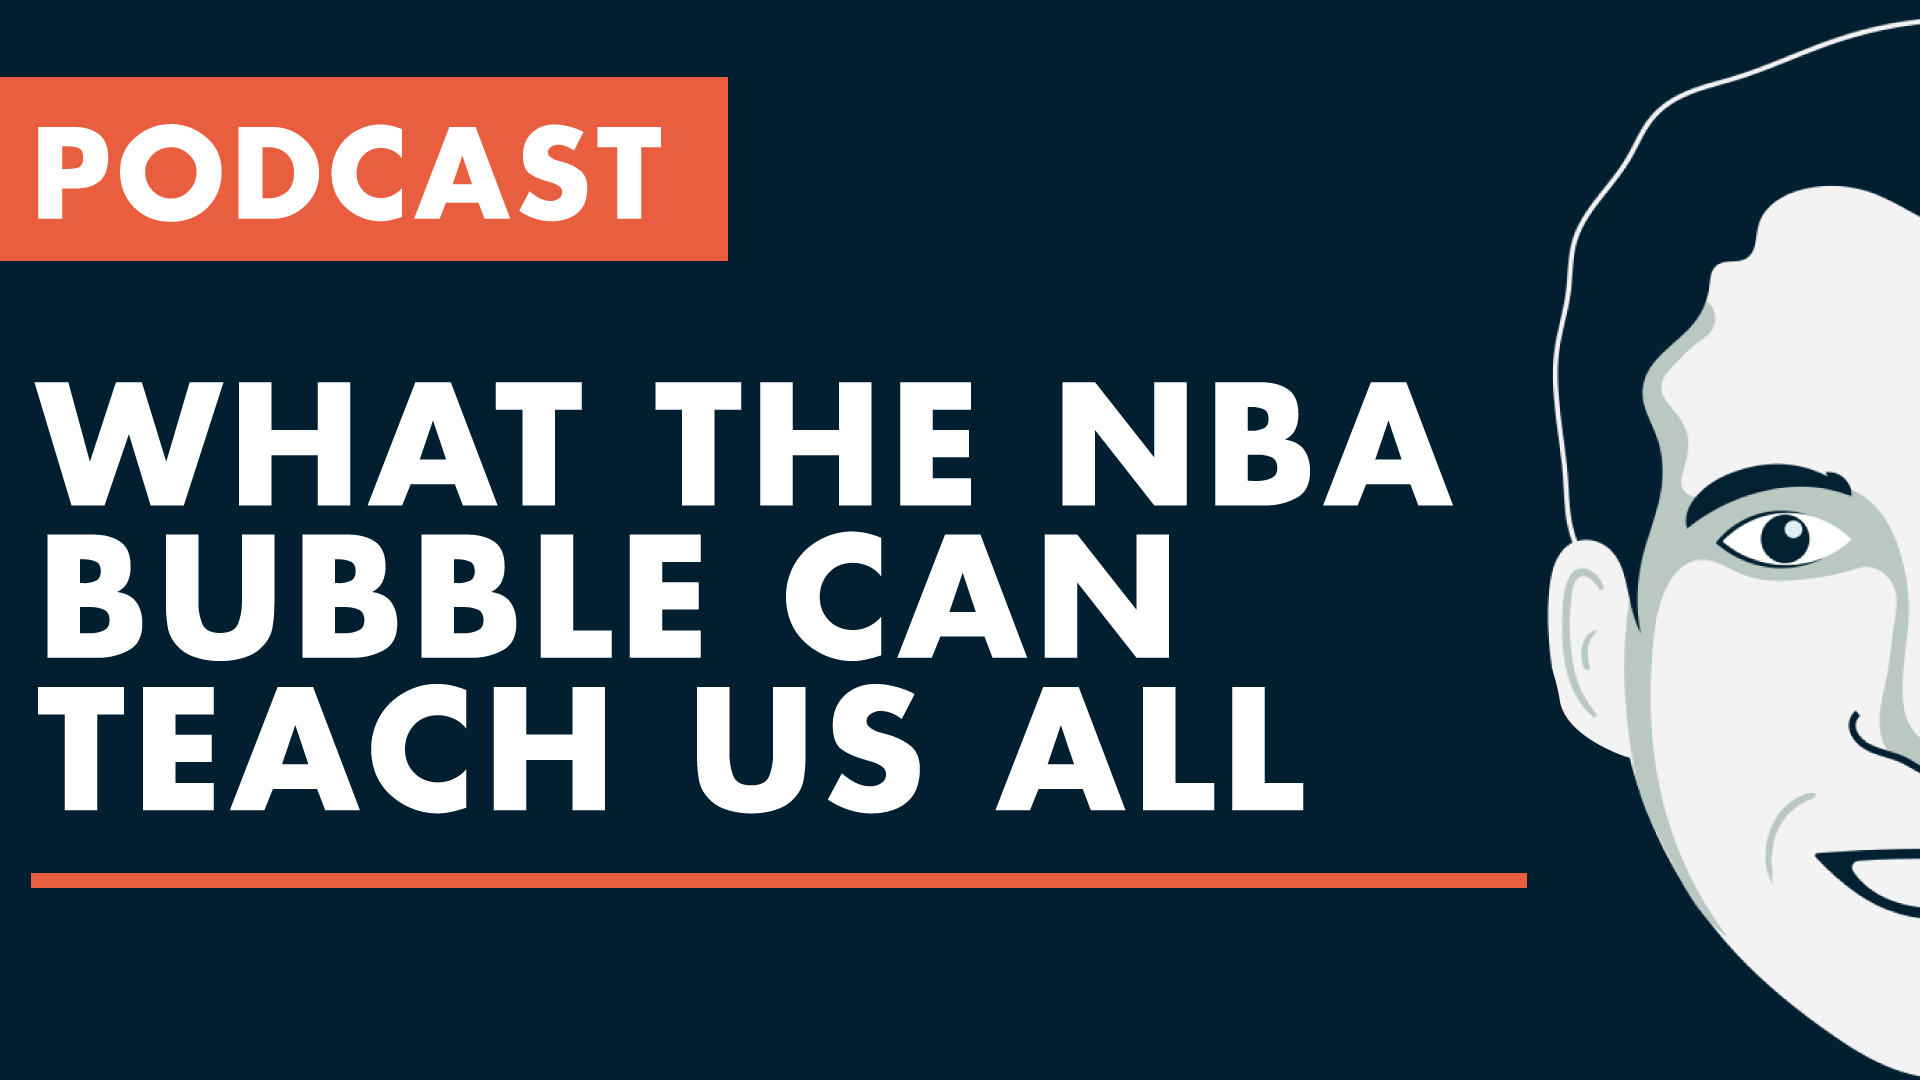 What the NBA Bubble Can Teach Us Episode 242 IRA Financial Group